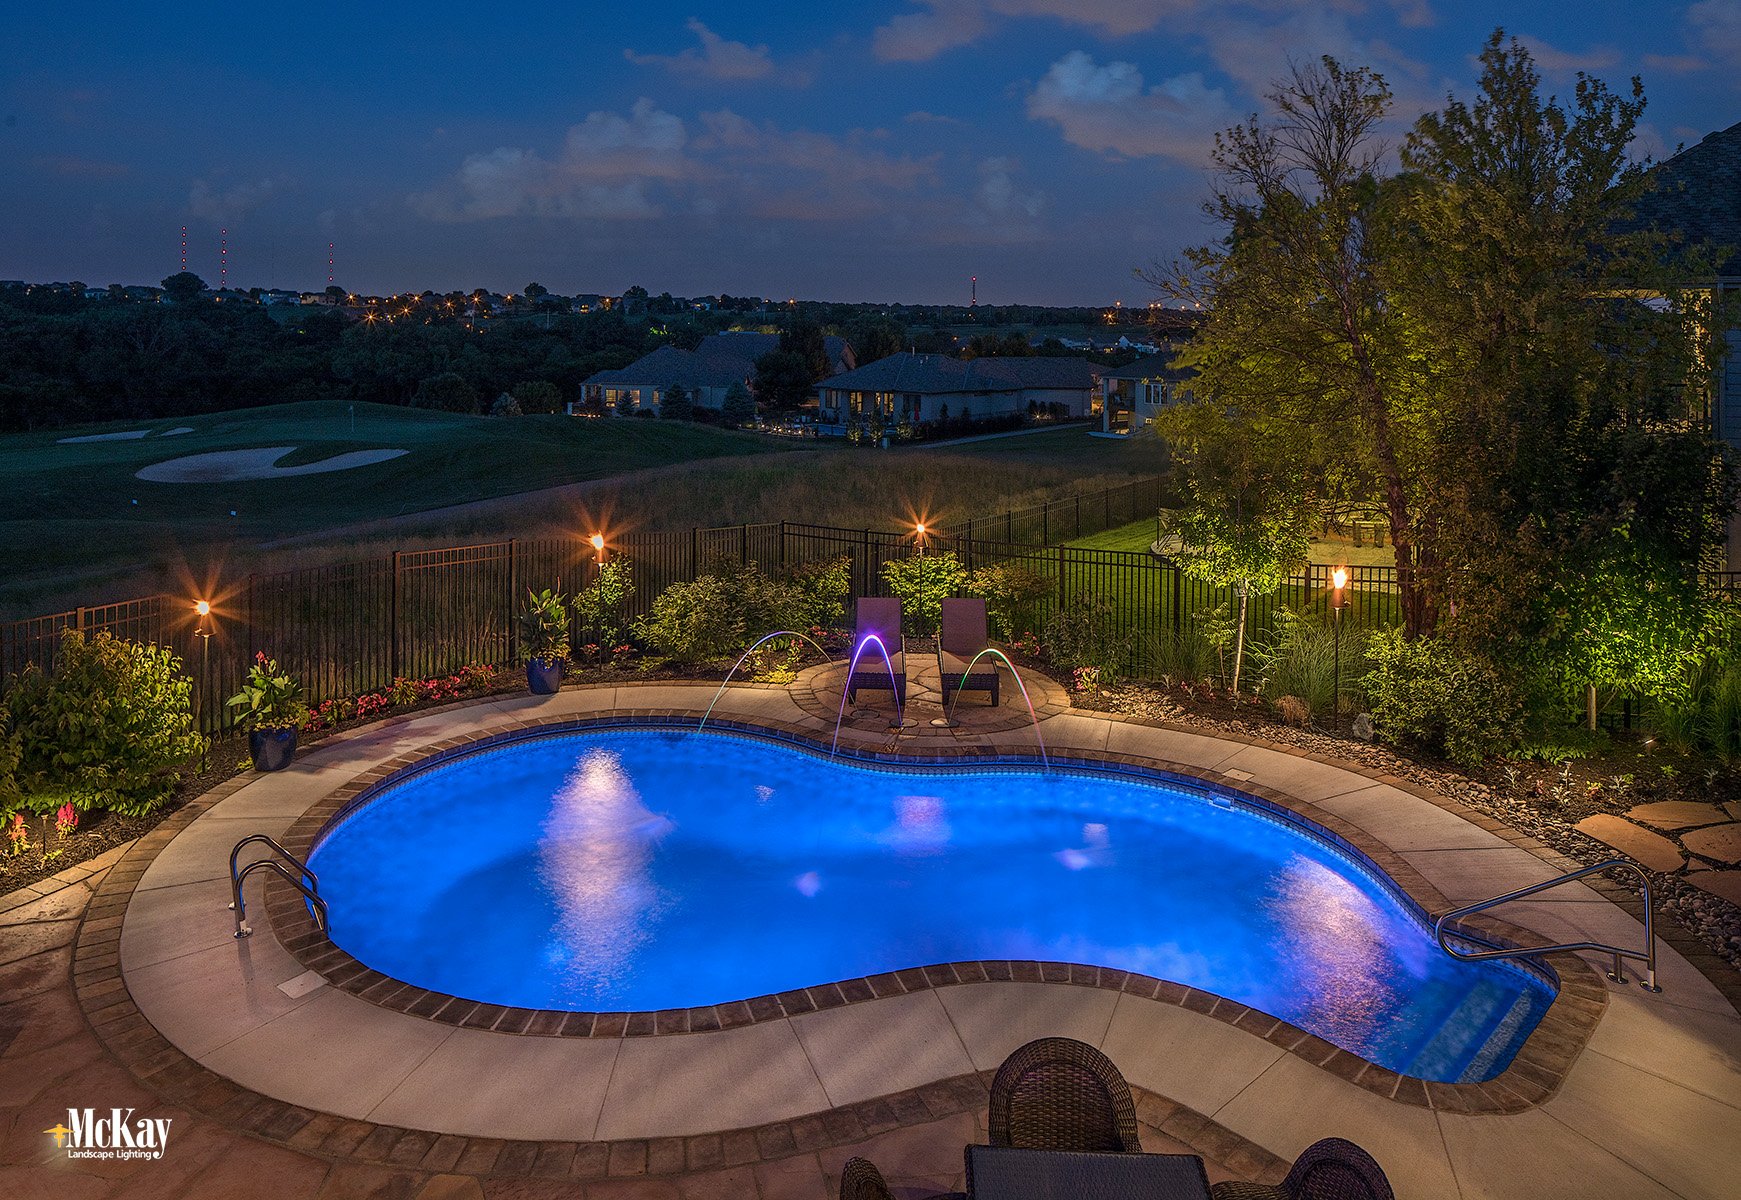 Installing Lighting Features For Nighttime Ambiance In Your Above Ground Pool